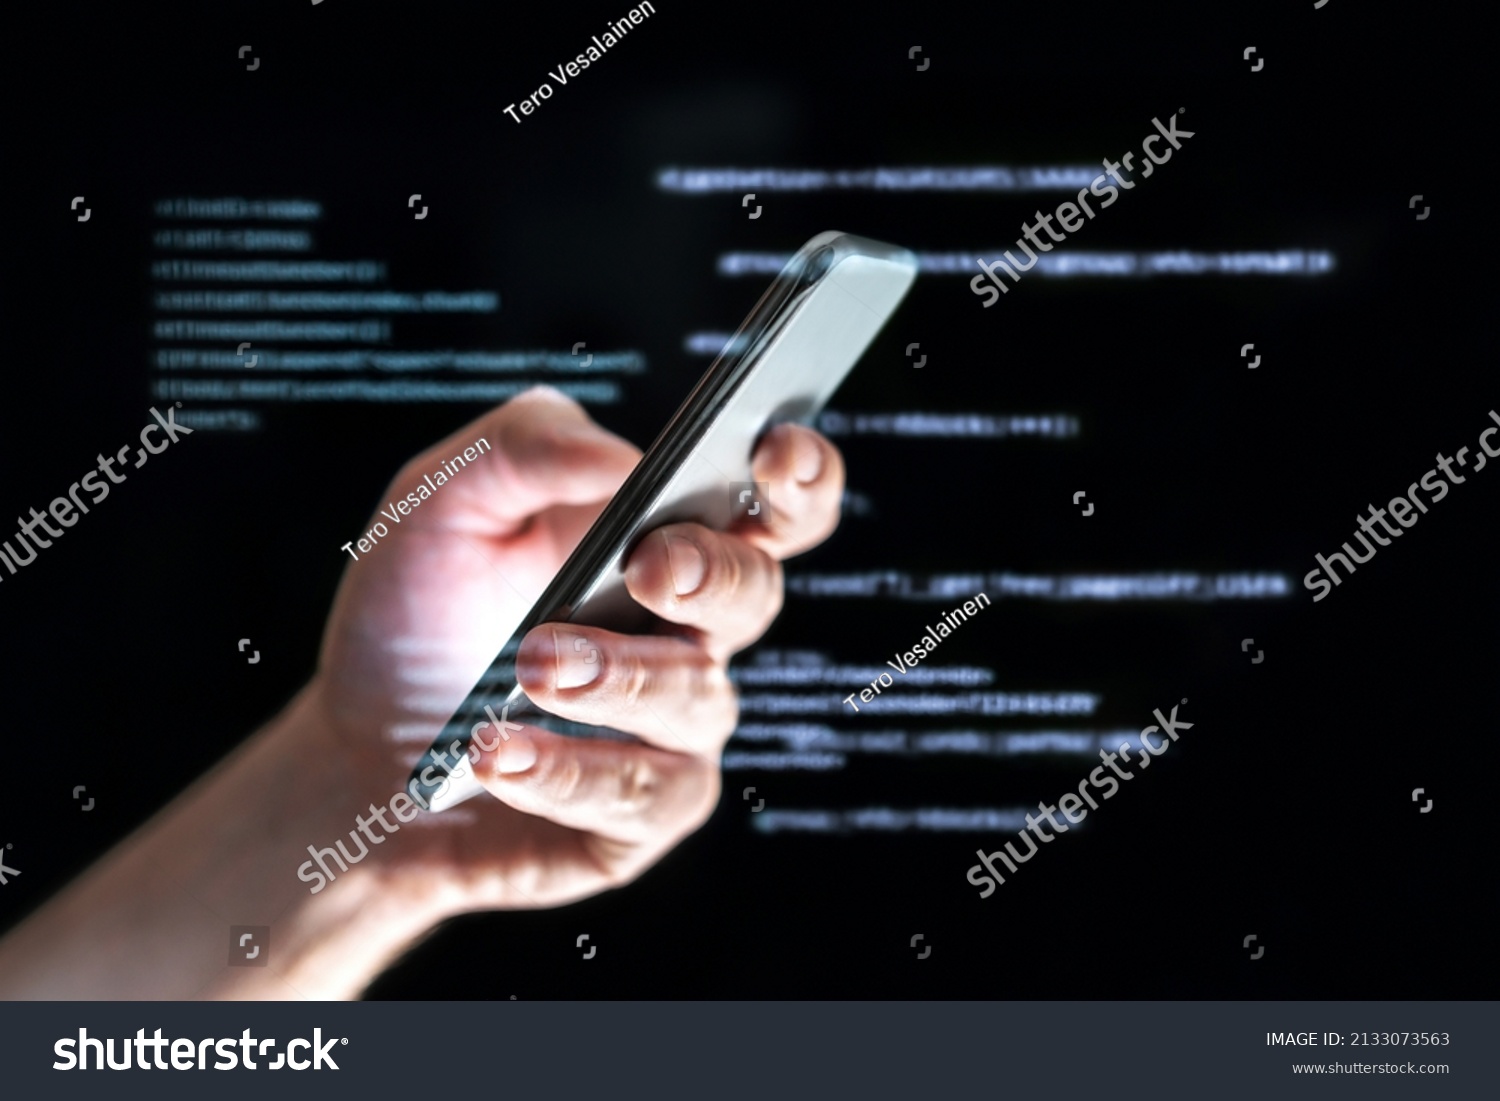 Data hacker or catfish using sms texting. Text message phone fraud or scam. Online chatbot or tech support forum. Secret darkweb conversation. Smartphone identity theft by scammer. #2133073563